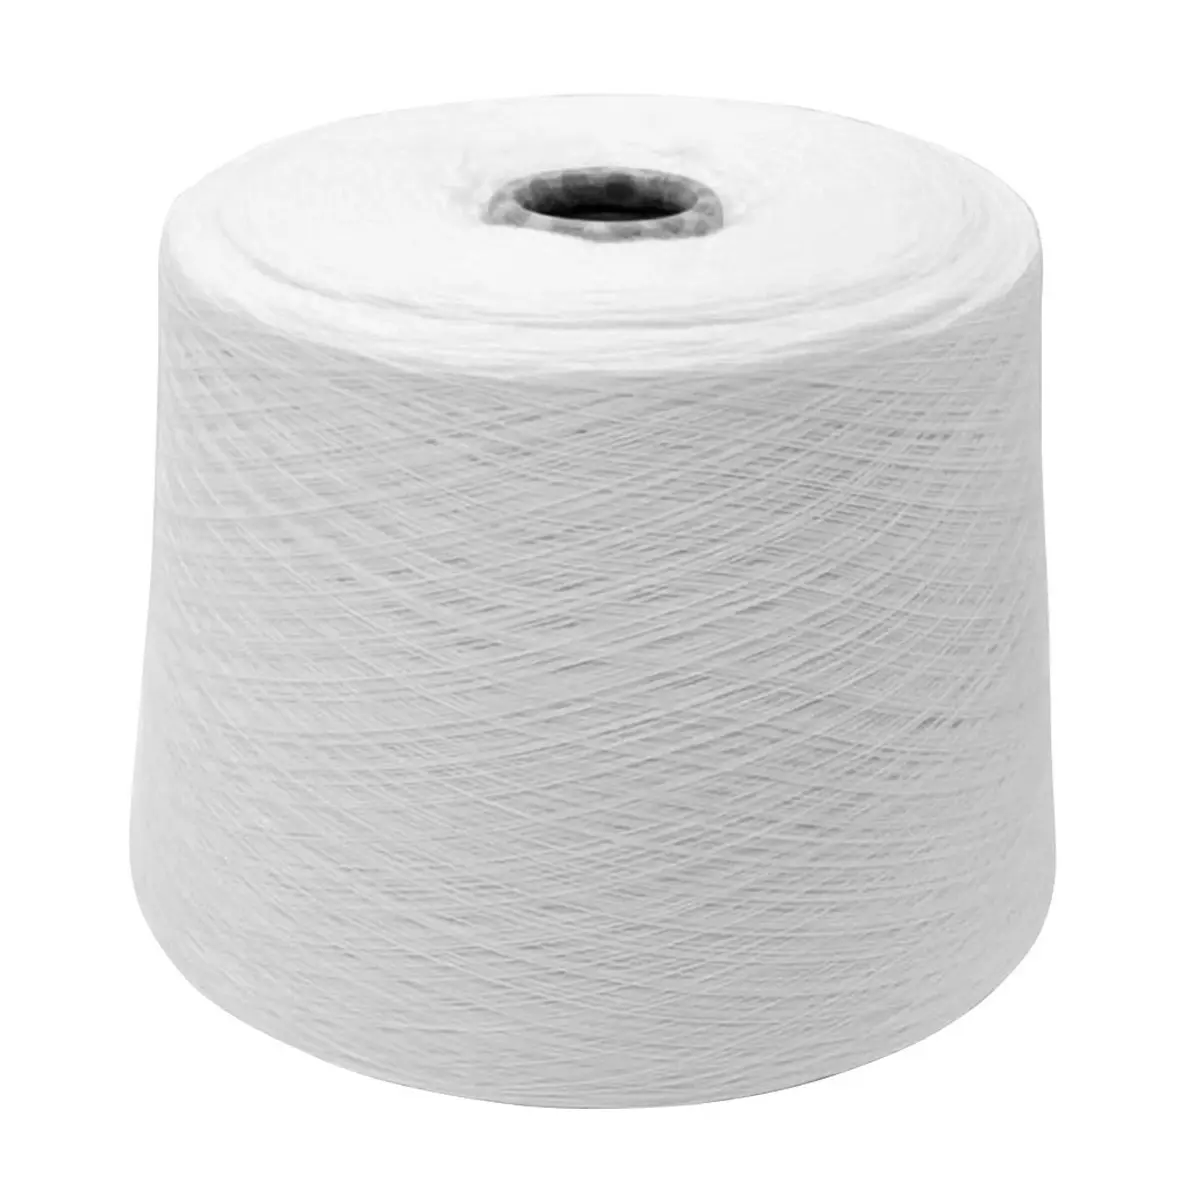 High quality 100% cotton yarn for the production of clothing own production